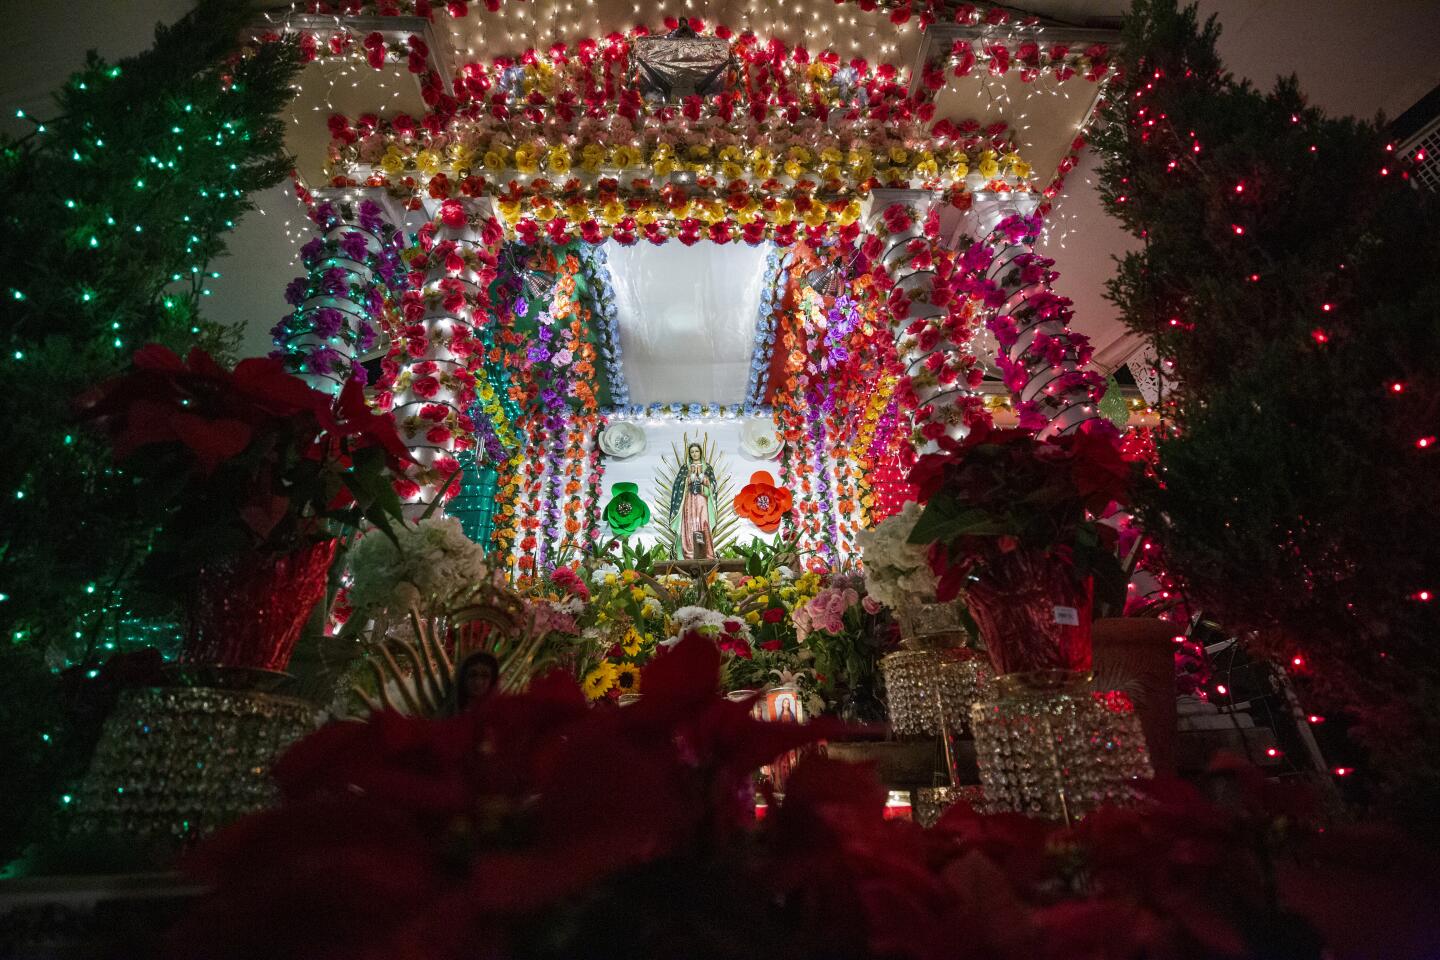 While people in Mexico celebrate el Día de La Virgen de Guadalupe at churches and street altars, many migrants, like Luis Cantabrana of Santa Ana, connect with their roots by keeping this tradition alive in the United States. The celebration of Our Lady of Guadalupe is one of the most important holidays for Mexican Catholics. Even for the non-religious, it is hard to escape her influence in Mexican culture. Her presence is felt even more as her feast approaches on Dec. 12. Religious Mexicans, on either side of the border, show their devotion for la Guadalupana with over-the-top displays. This could involve walking miles on one's knees to her Basilica in Mexico City or, in the case of Cantabrana, building a shrine on the front porch of his house.